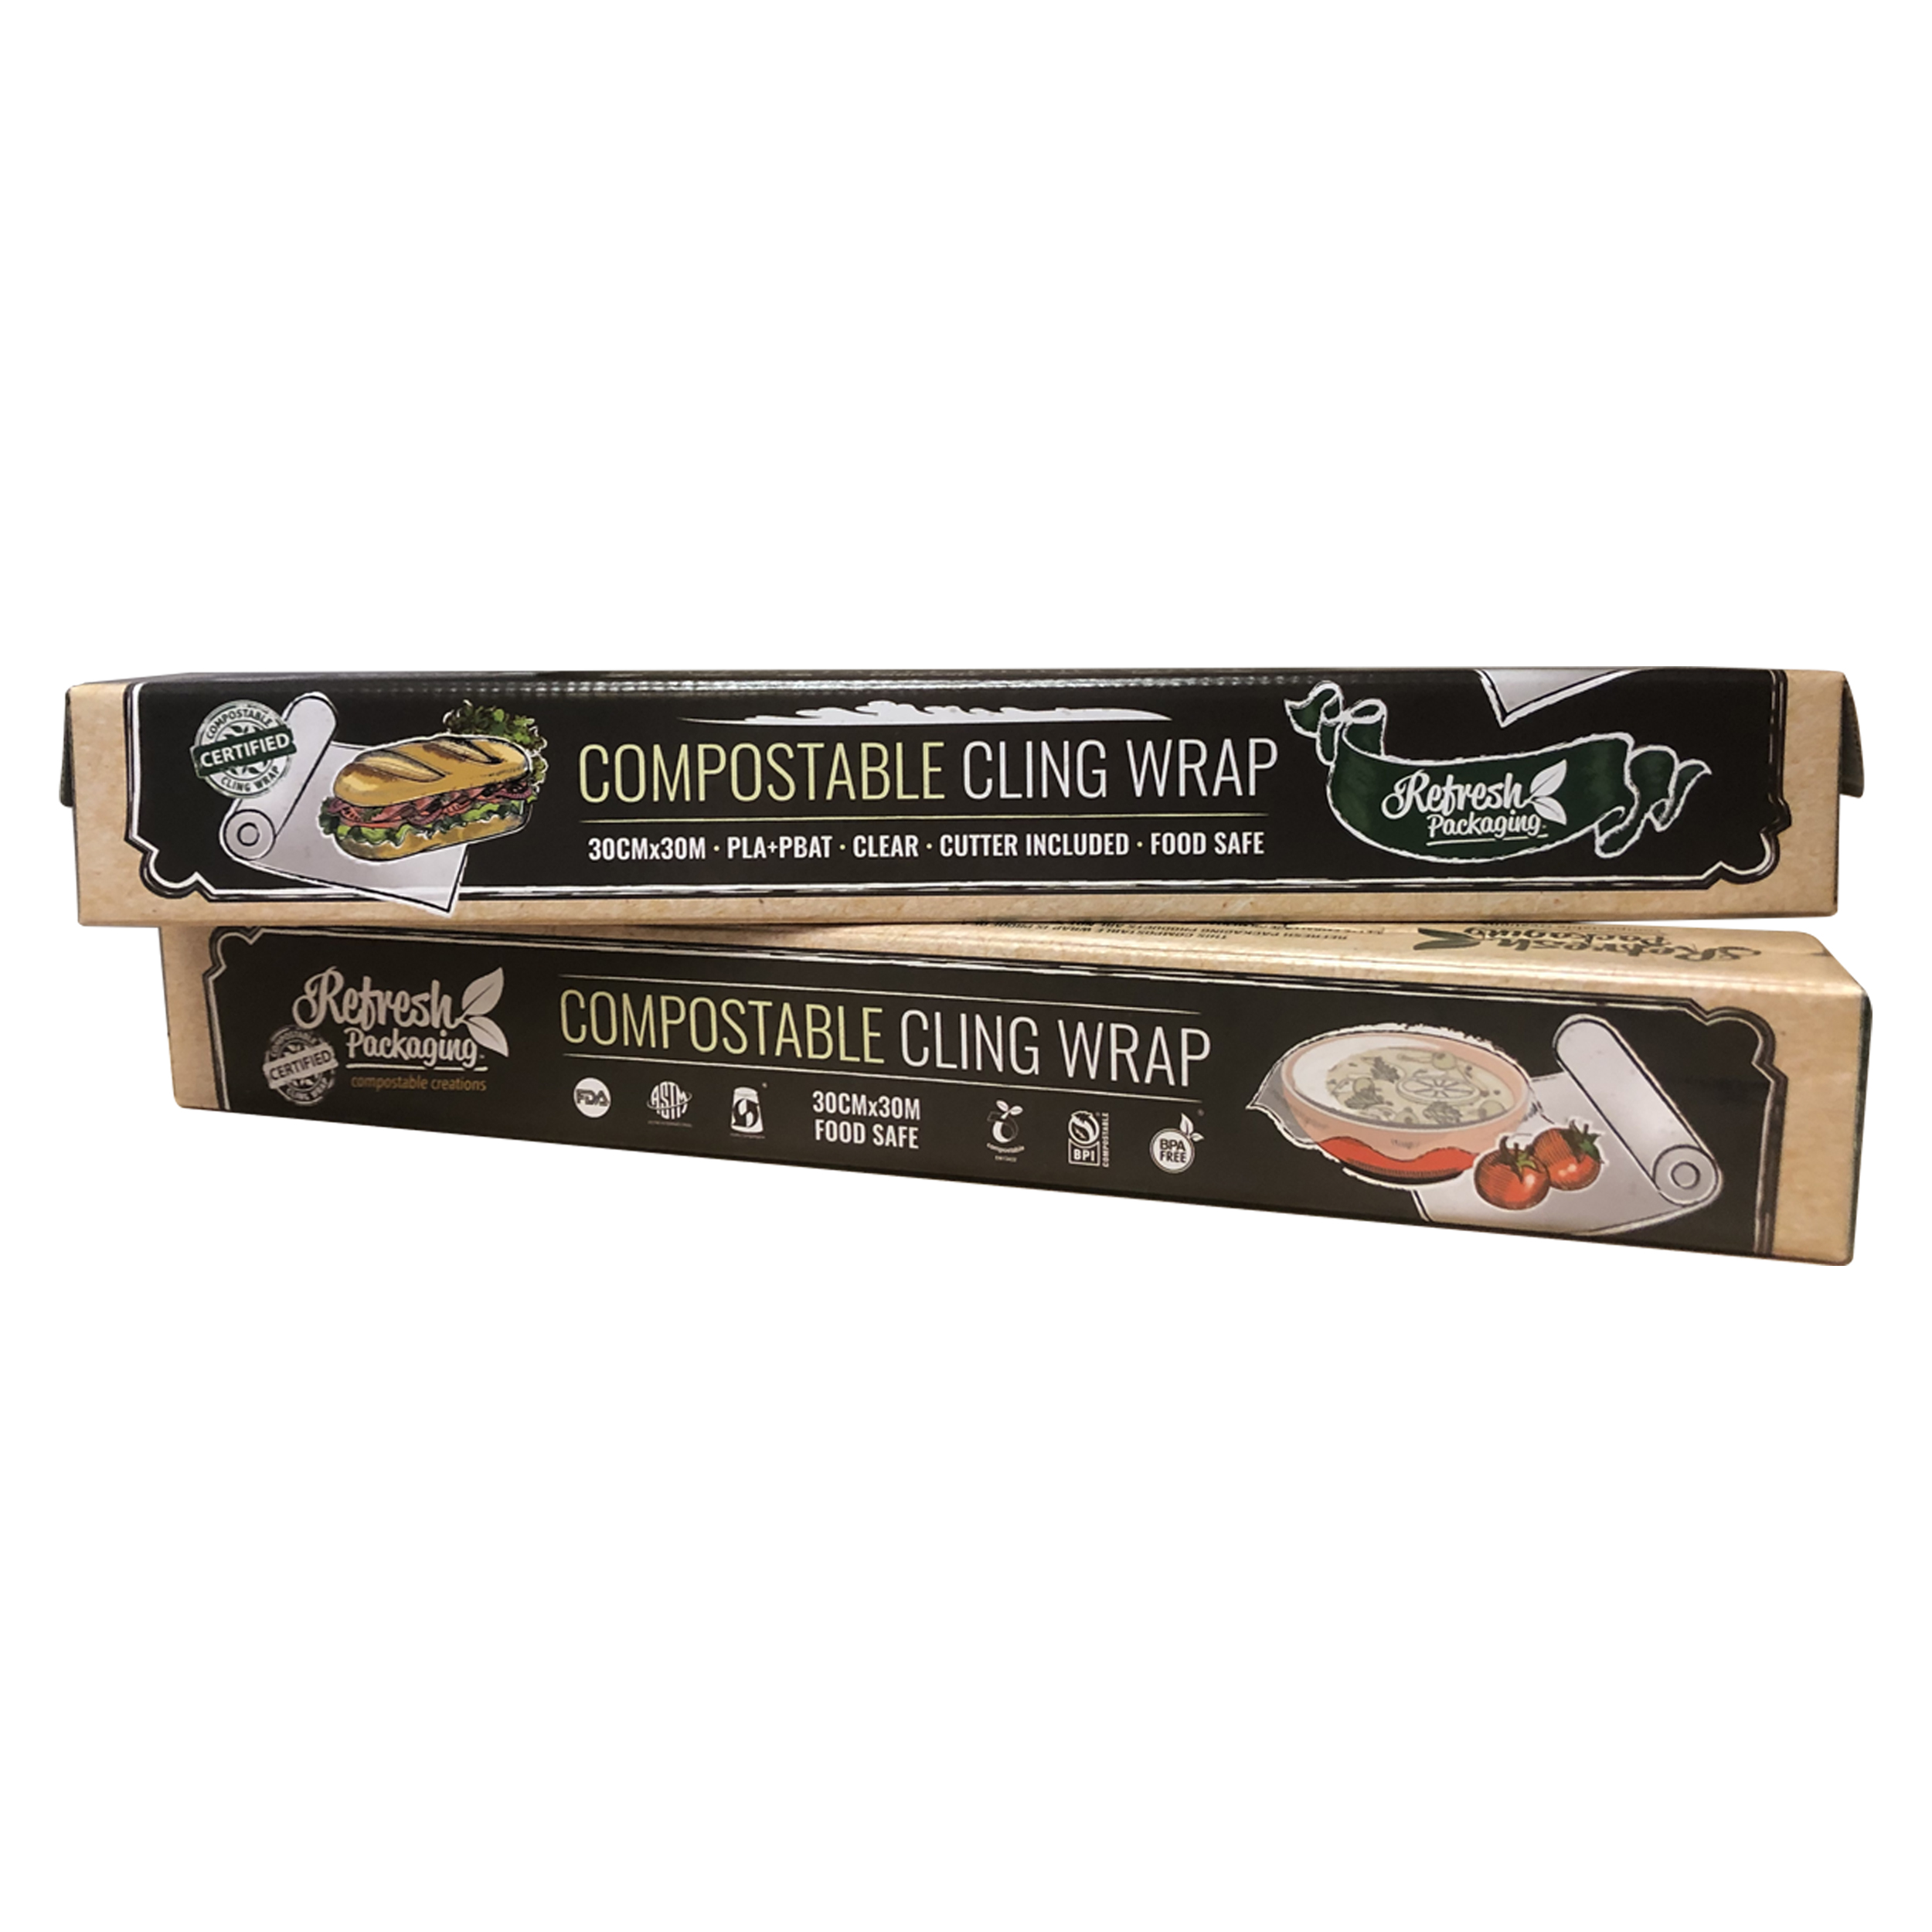 Compostable Cling Wrap – 2 pack